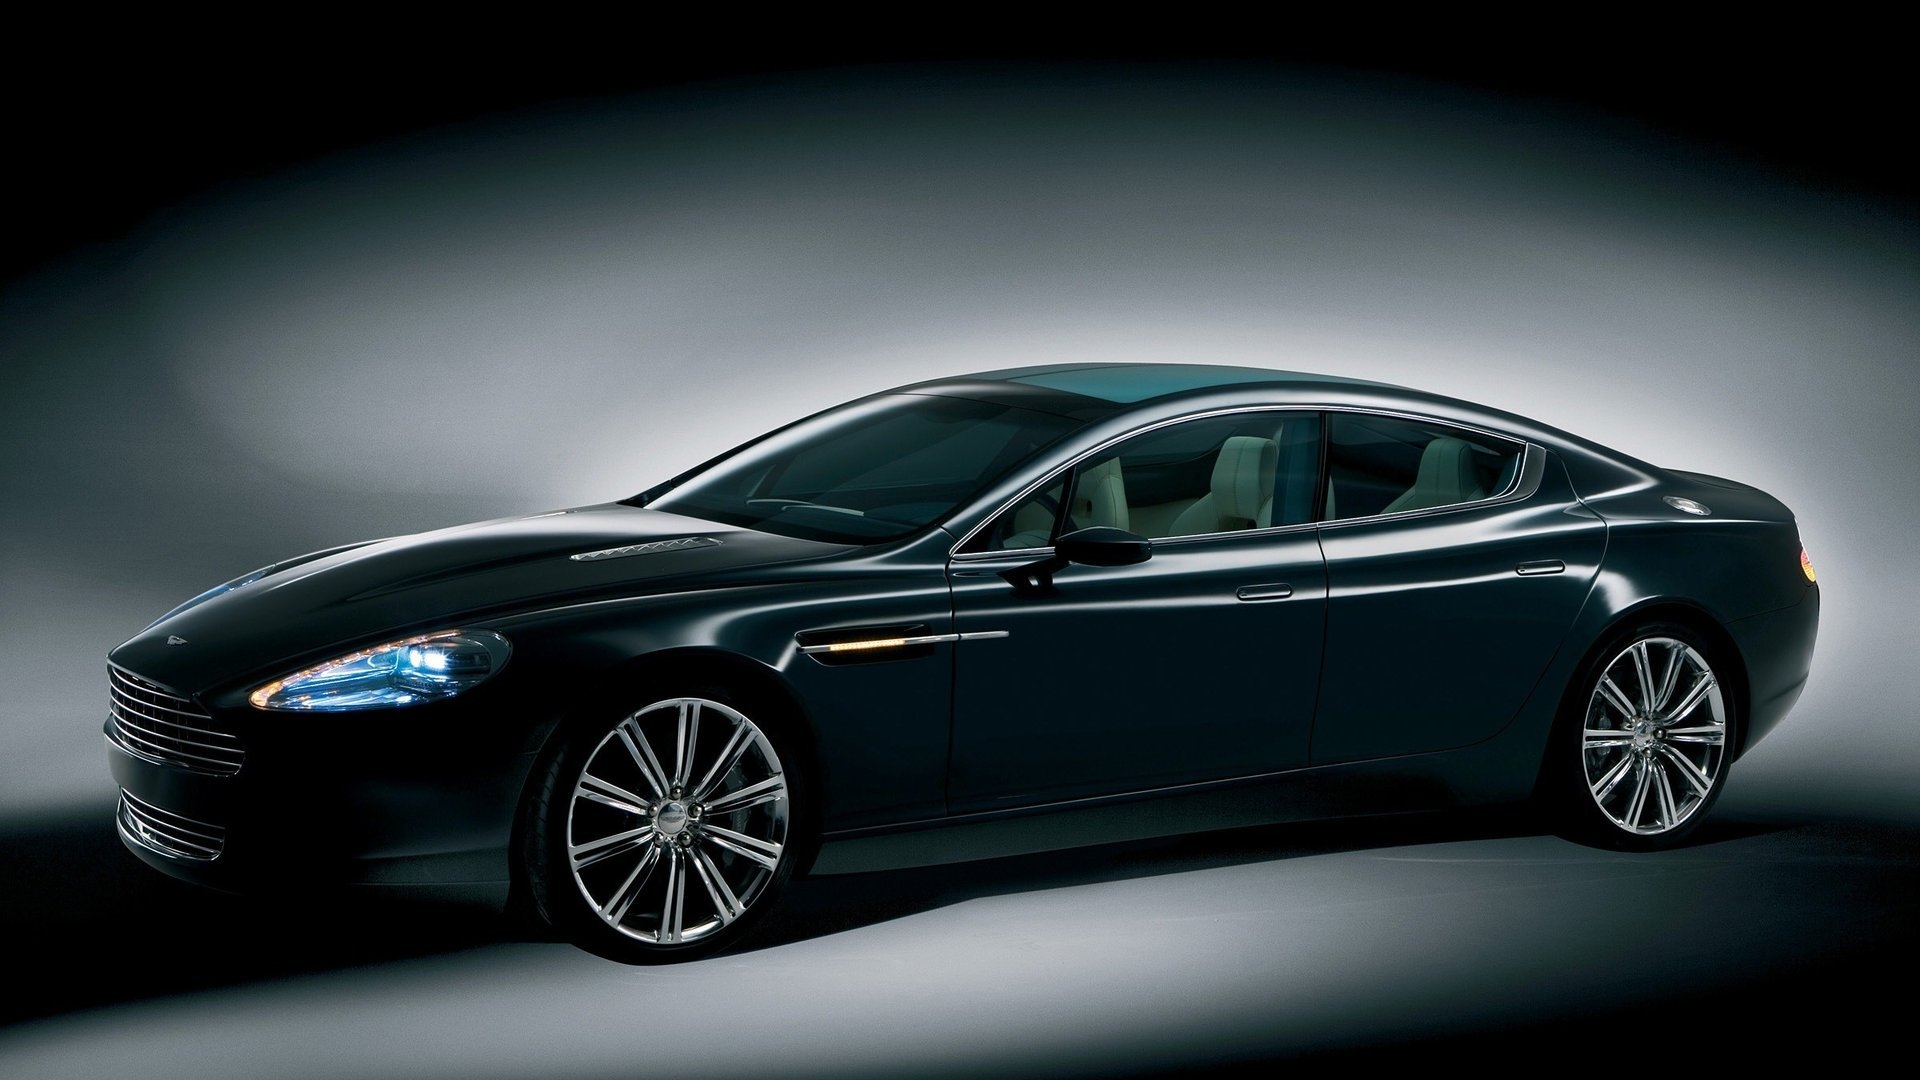 Superb Aston Martin Side View for 1920 x 1080 HDTV 1080p resolution